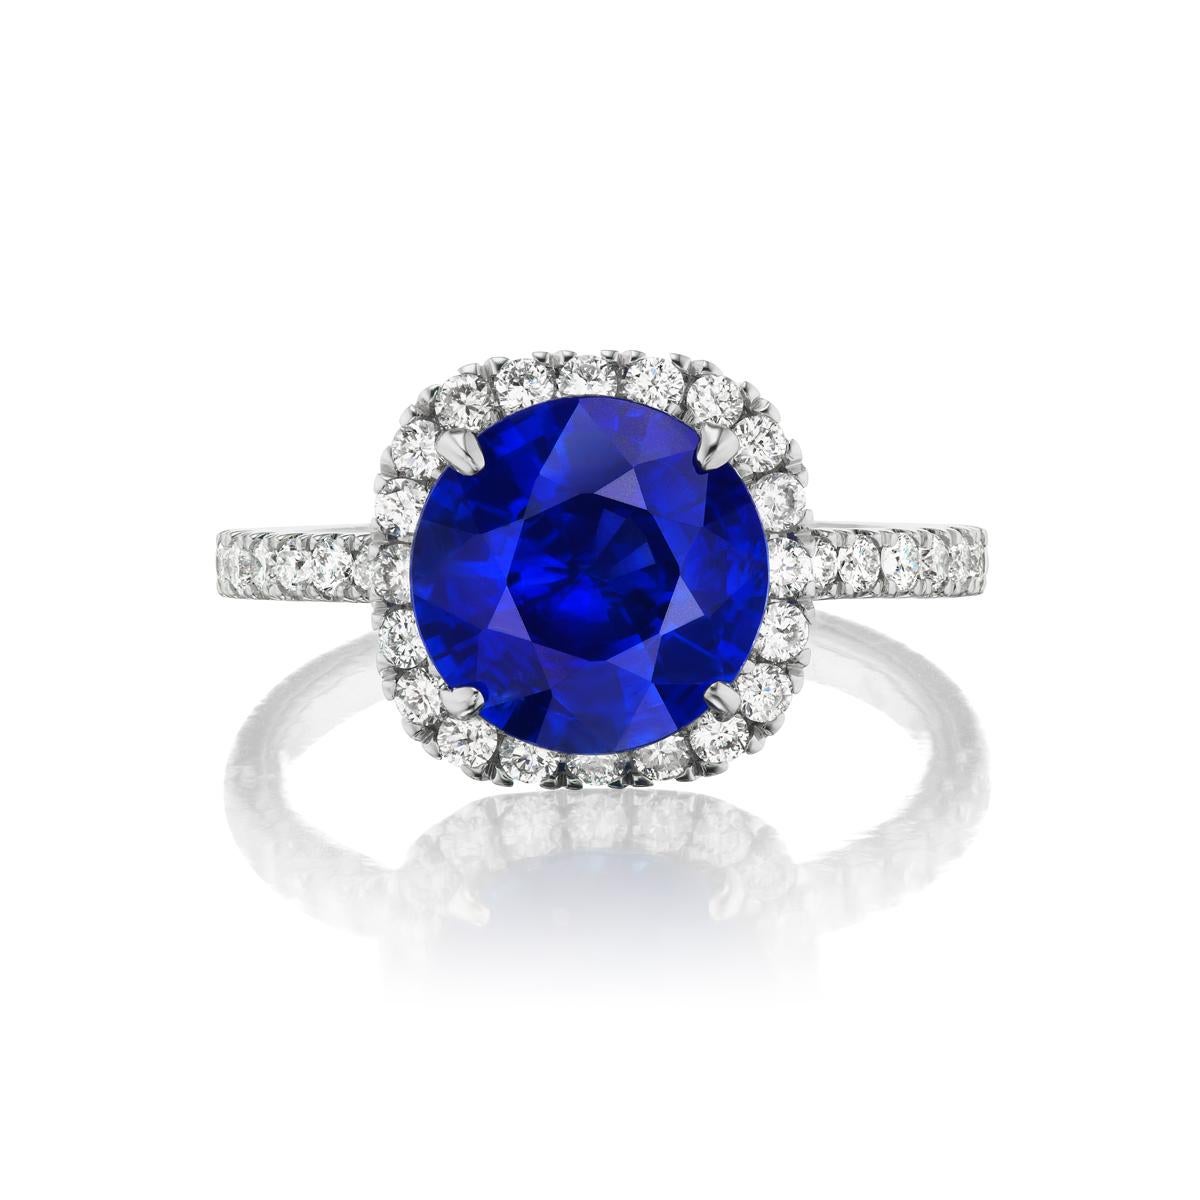 SAPPHIRE AND DIAMOND RING
A dazzling blue sapphire in a prong setting is surrounded by a glimmering diamond halo. The shoulders of the ring are also adorned with diamond accents for added sparkle. Crafted in 14k white gold, this round sapphire halo